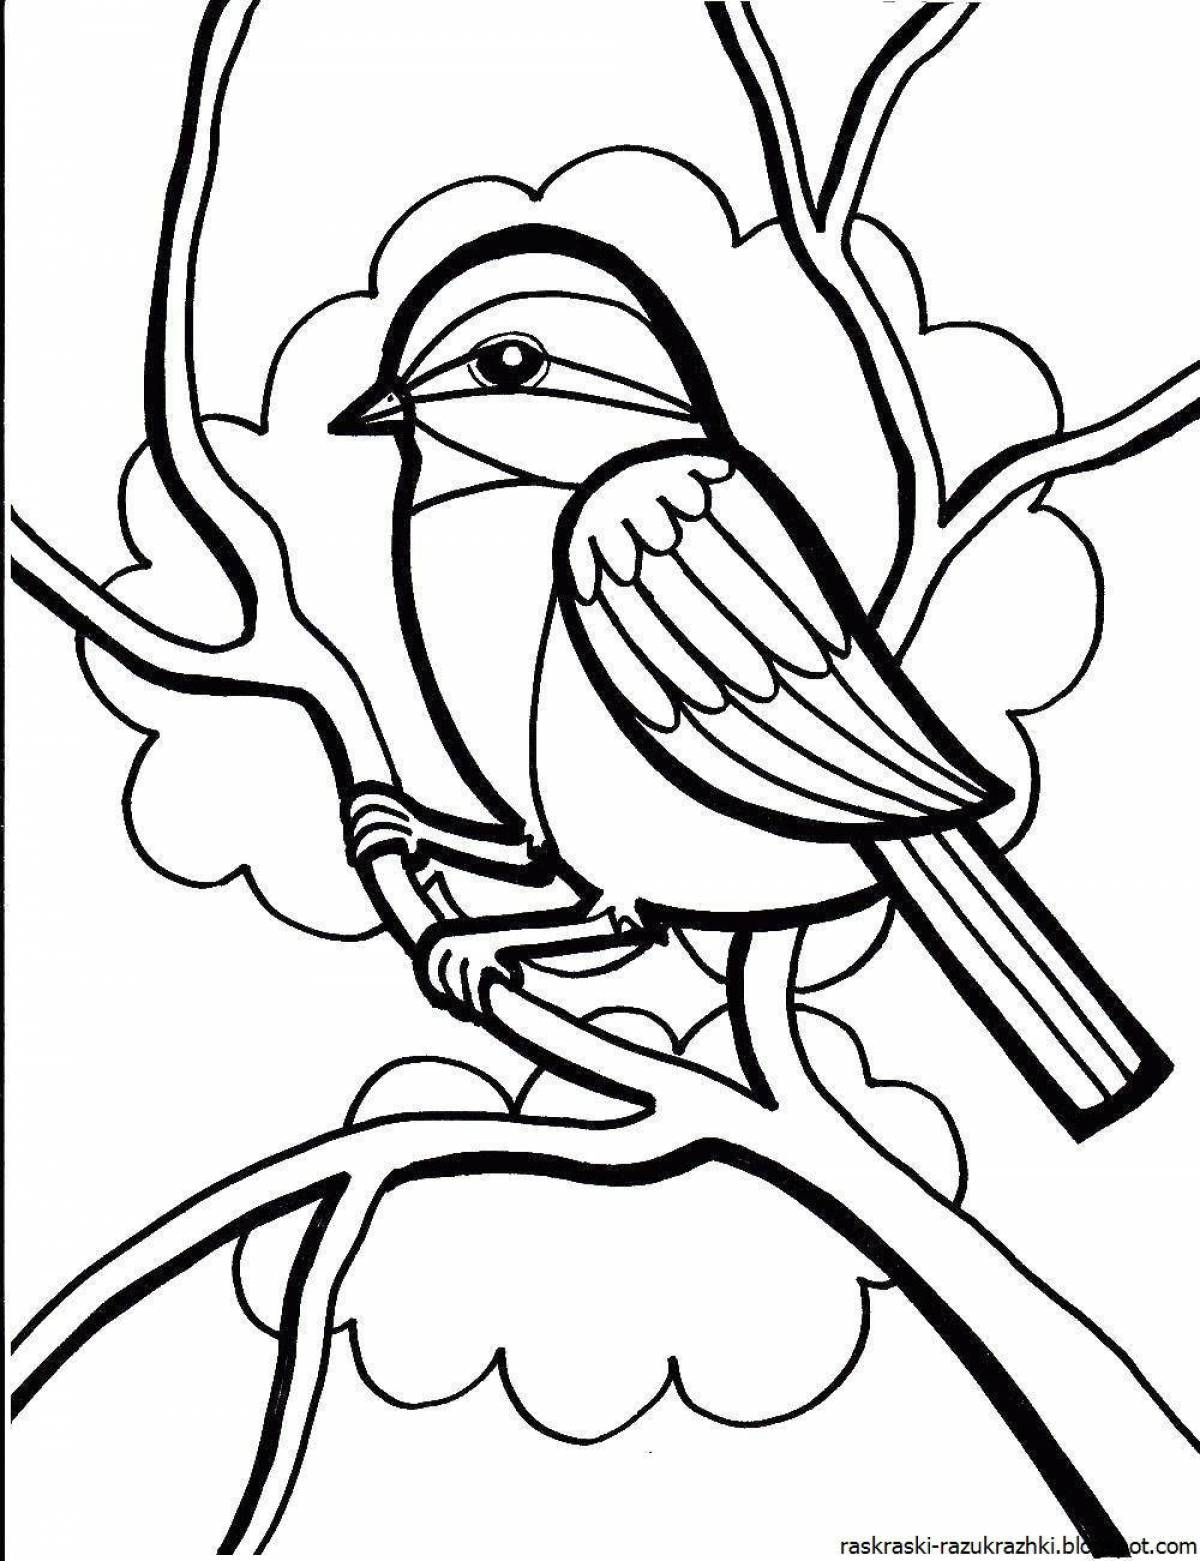 Encouraging bird coloring pages for kids